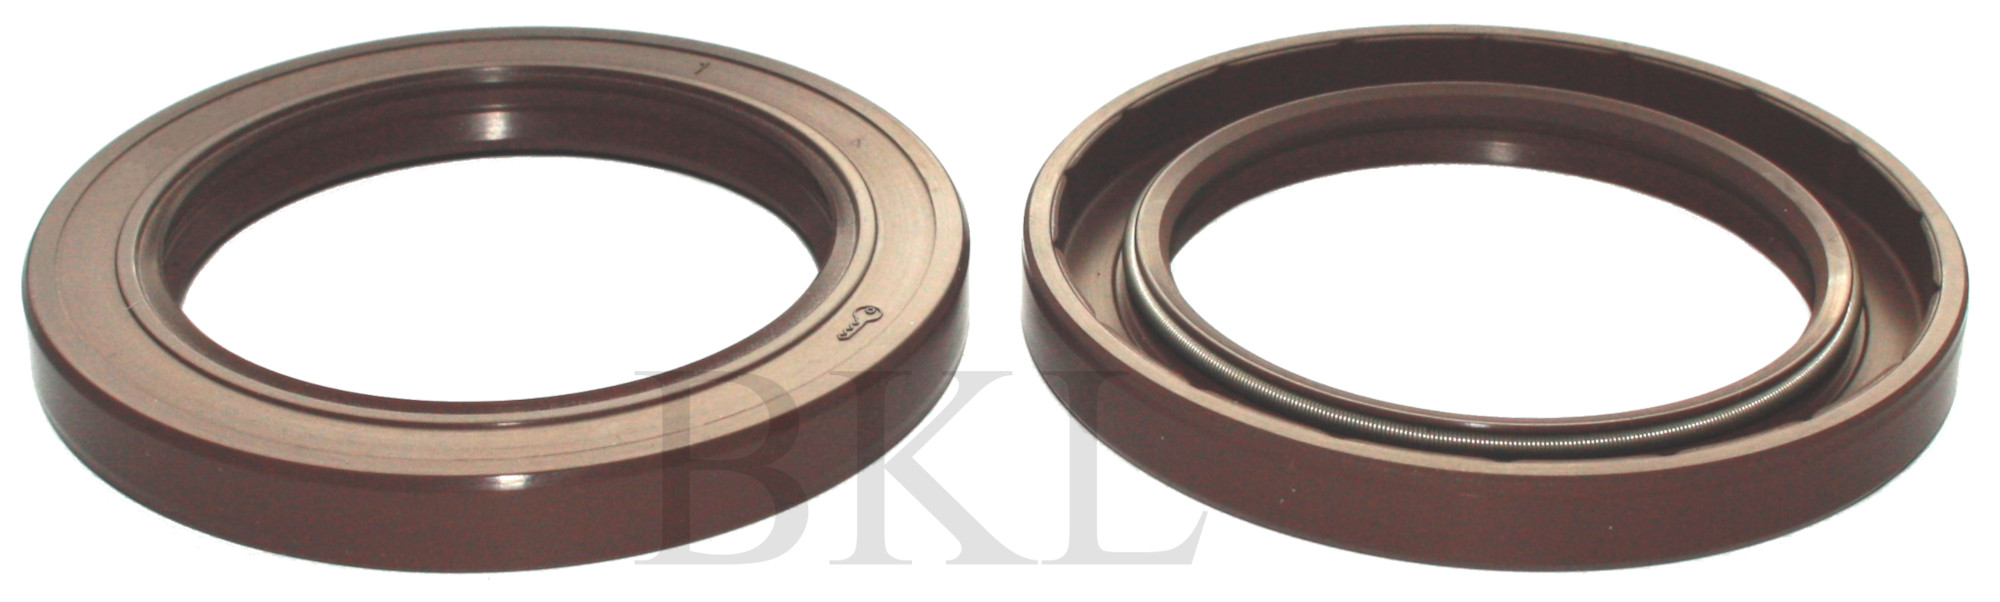 95x120x13mm R23/TC Double Lip Viton Rotary Shaft Oil Seal with Garter Spring image 2